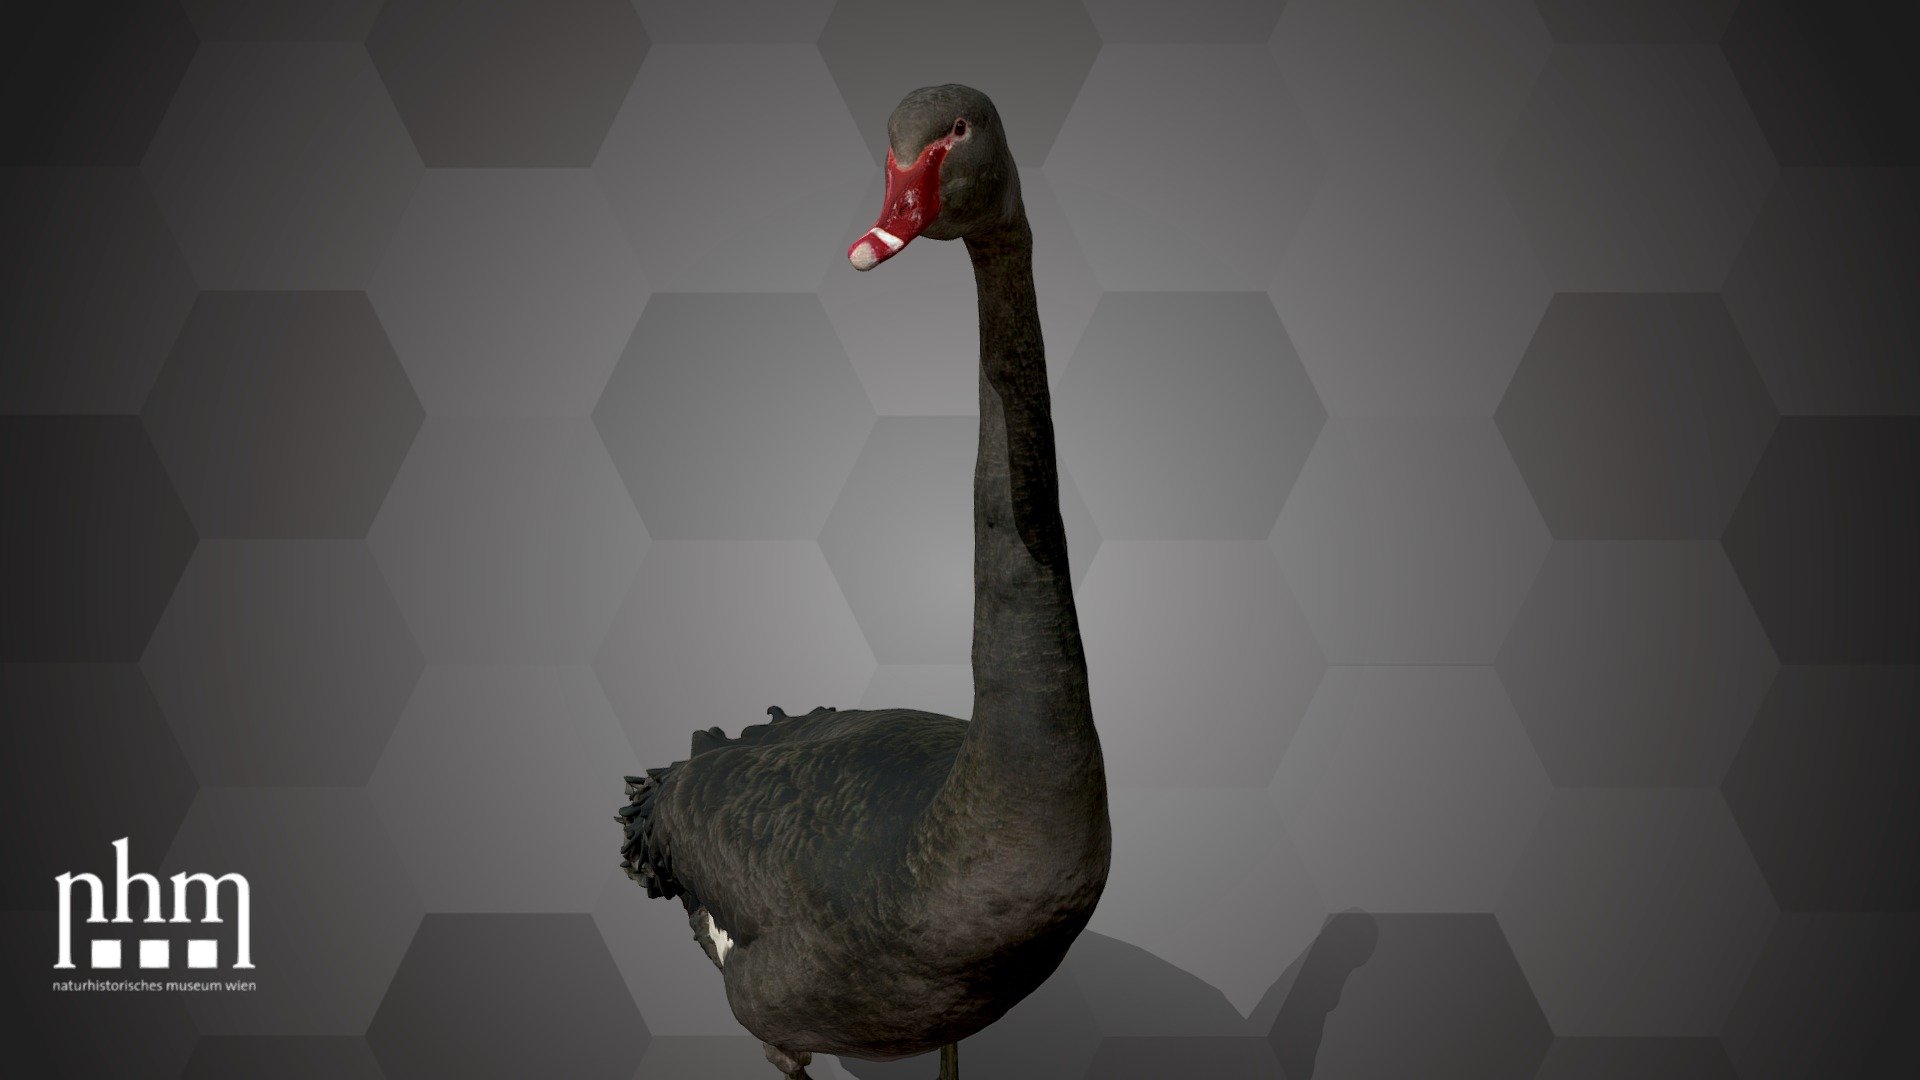 3D scan of a black swan (Cygnus atratus), a large bird which is native to Australia and Tasmania. Fully grown black swans can be up to about 1.40 meters long and weigh up to 9 kilograms.

In Austria the black swan is an alien species which breeds irregularly elsewhere. In Vienna a breeding population with up to 170 individuals became extinct in the late nineties.

The exhibited specimen has been donated to the NHM Vienna in 1921 by the “Tiergarten Schönbrunn”.

This black swan can be found in Hall 30 of the Natural History Museum Vienna.

Specimen: Cygnus atratus (Latham, 1790)

Inventory number: NHMW-Zoo1-VS 63420

Collection: Natural History Museum Vienna, 1st Zool. Dept., Bird Coll. (curator: Swen Renner)

Find out more about the NHM Vienna here.

Scanned and edited by Anna Haider and Viola Winkler (NHMW)

Scanner: Artec Leo. Infrastructure funded by the FFG 3d model